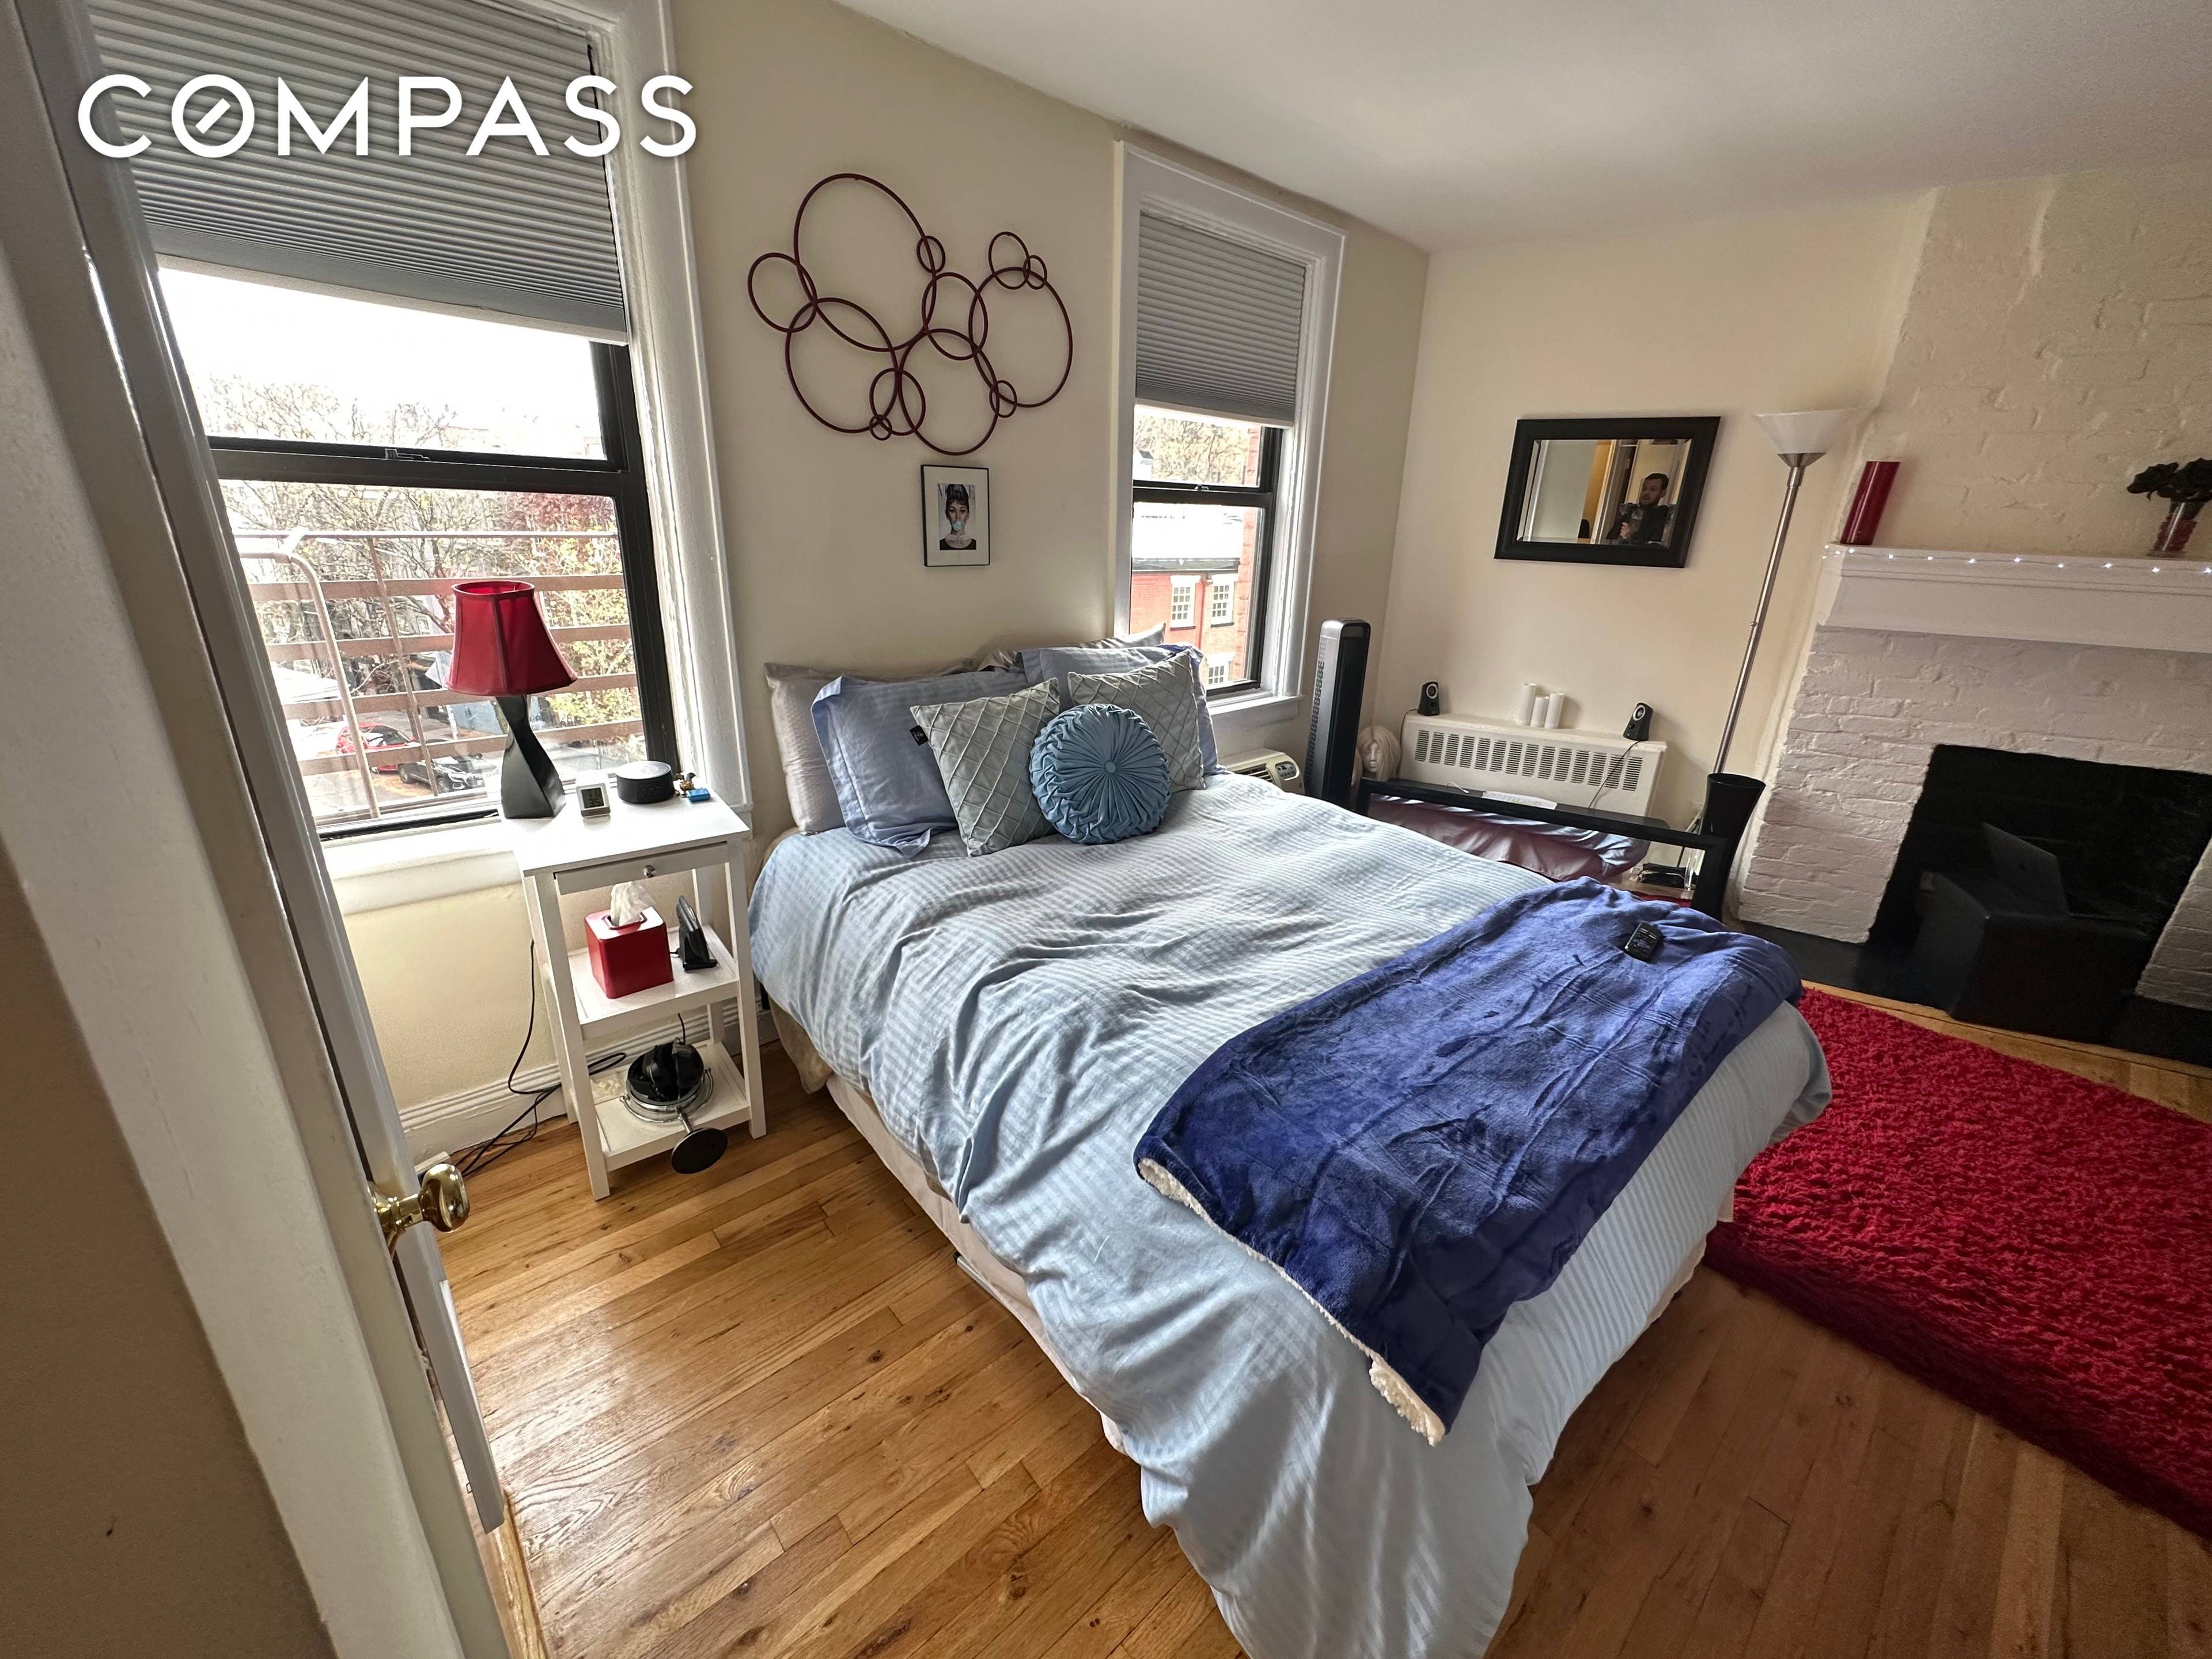 Available January 1, 2023 We am pleased to offer a RENT STABILIZED studio apartment in the heart of the West Village.